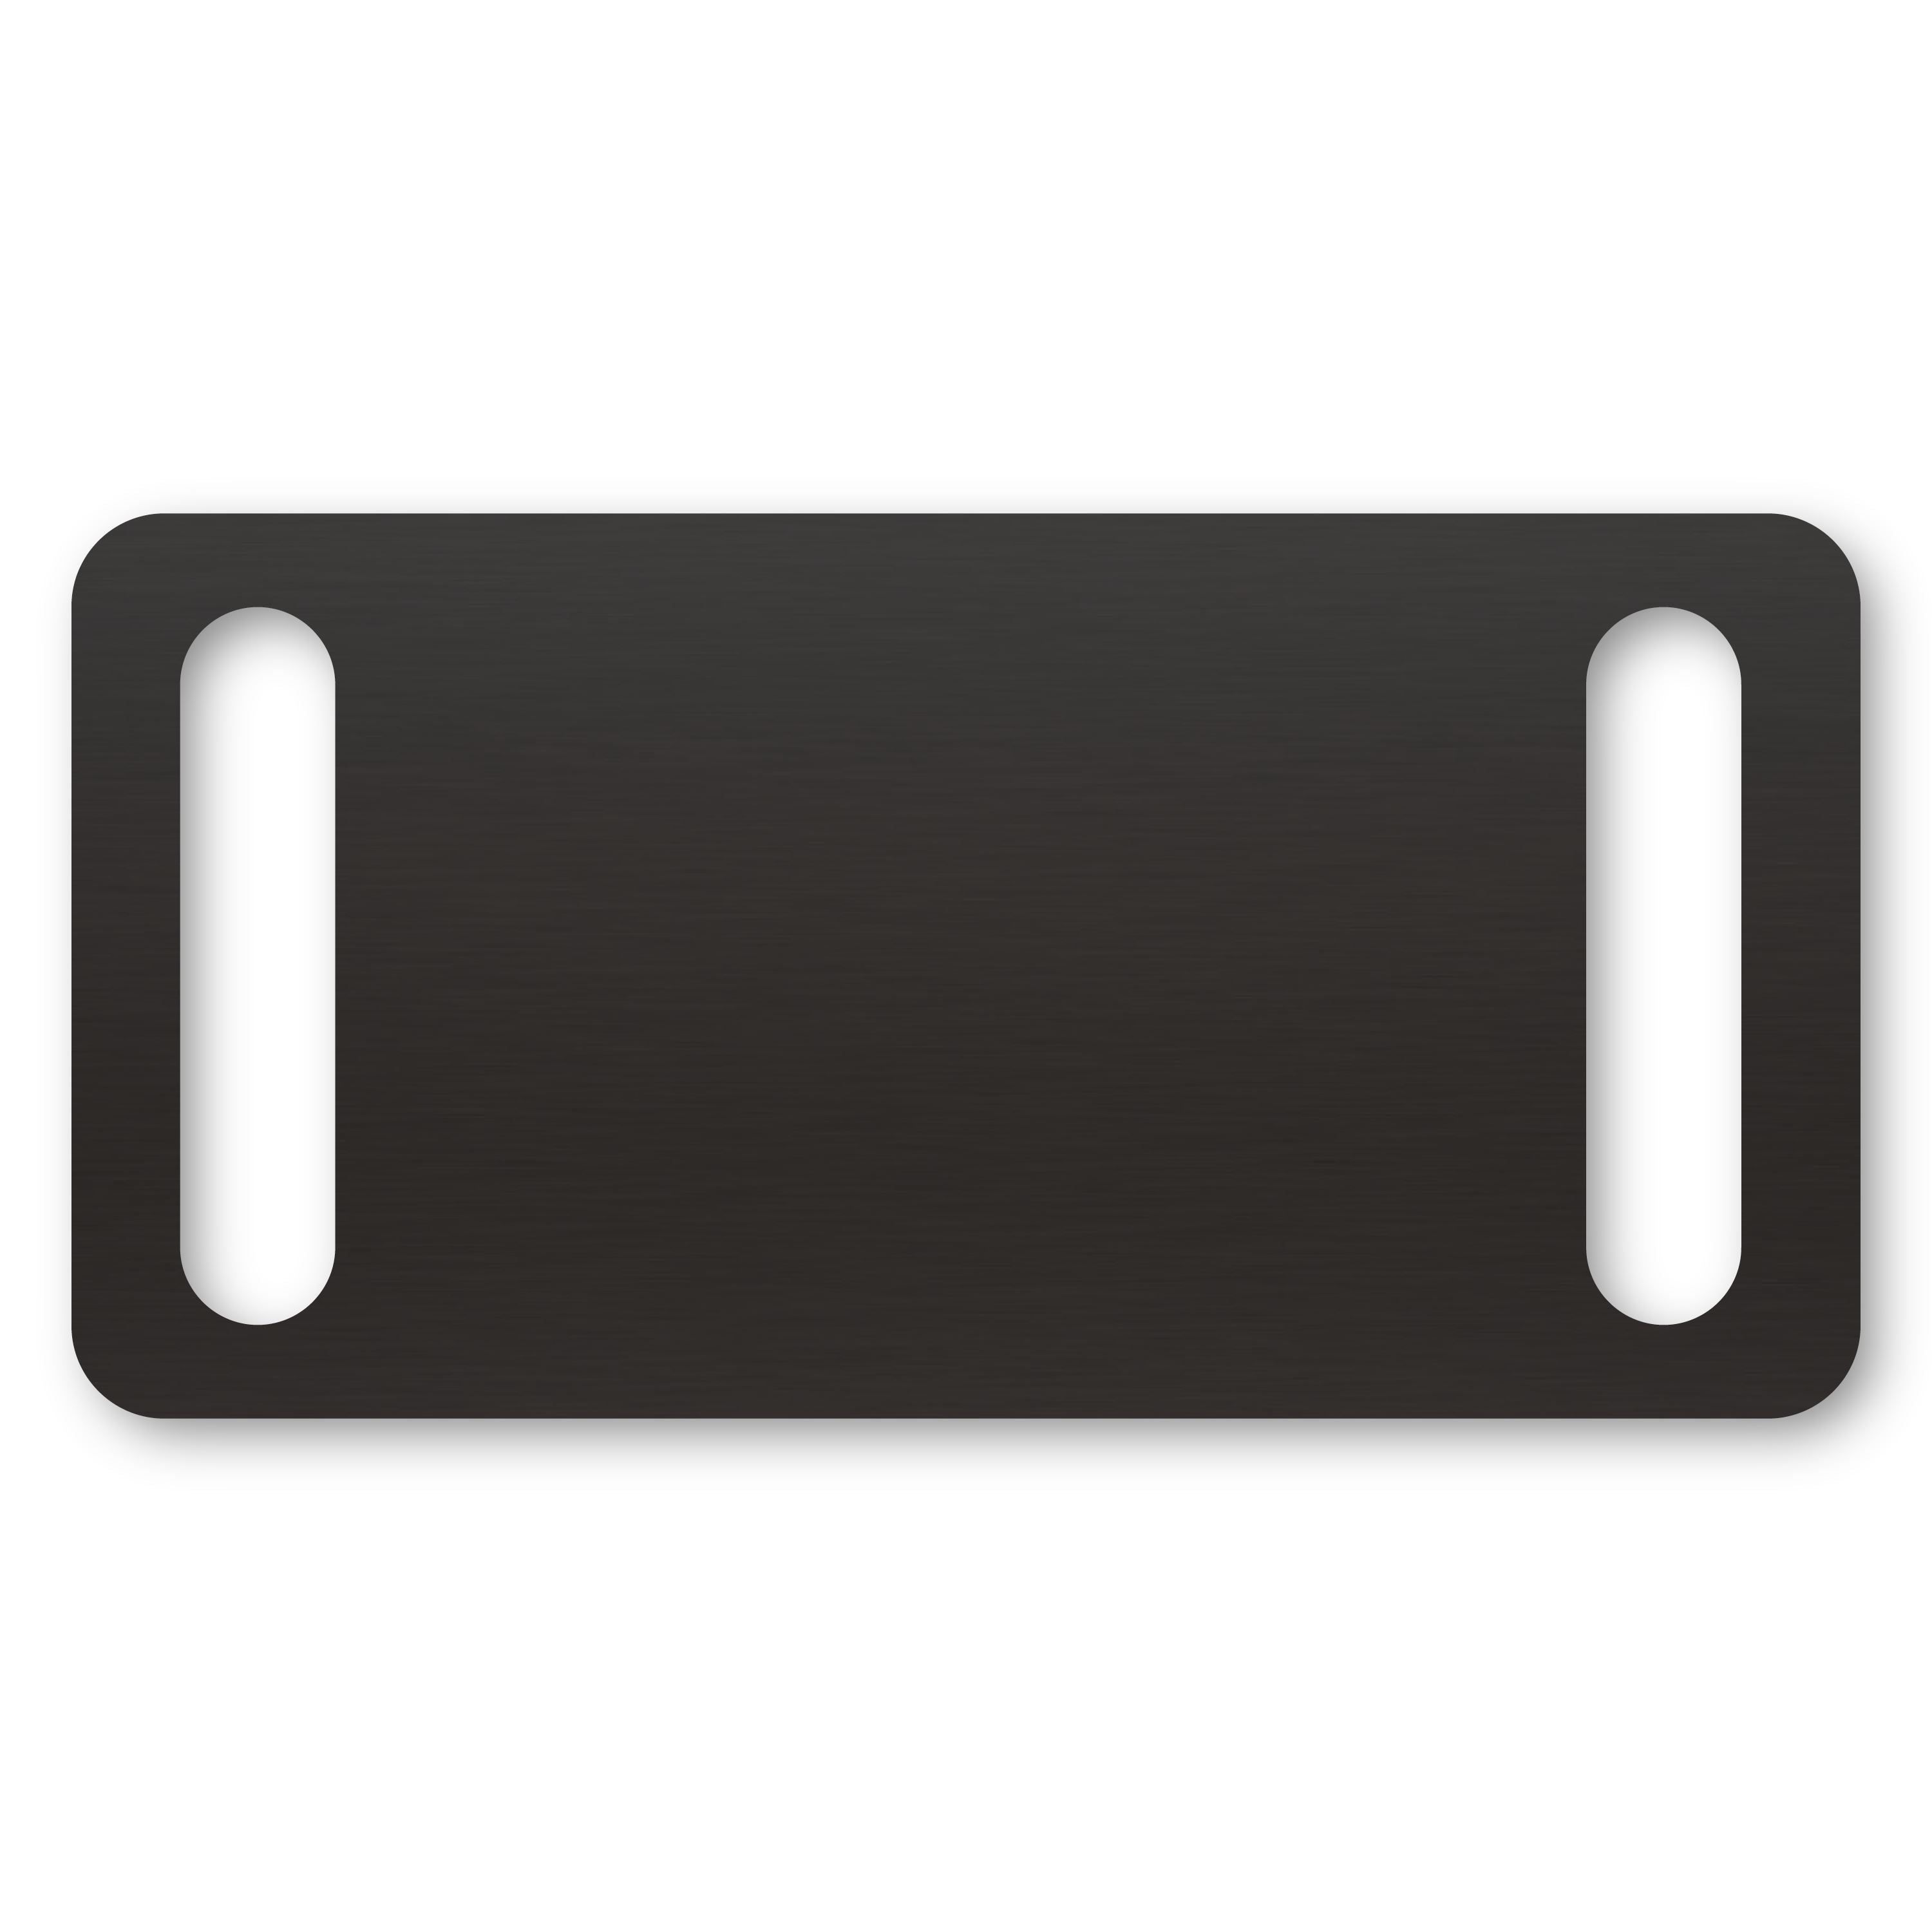 Anodized Aluminum Rectangle Slide-On Tags, 7/8 x 1-3/4 with 5/32 x